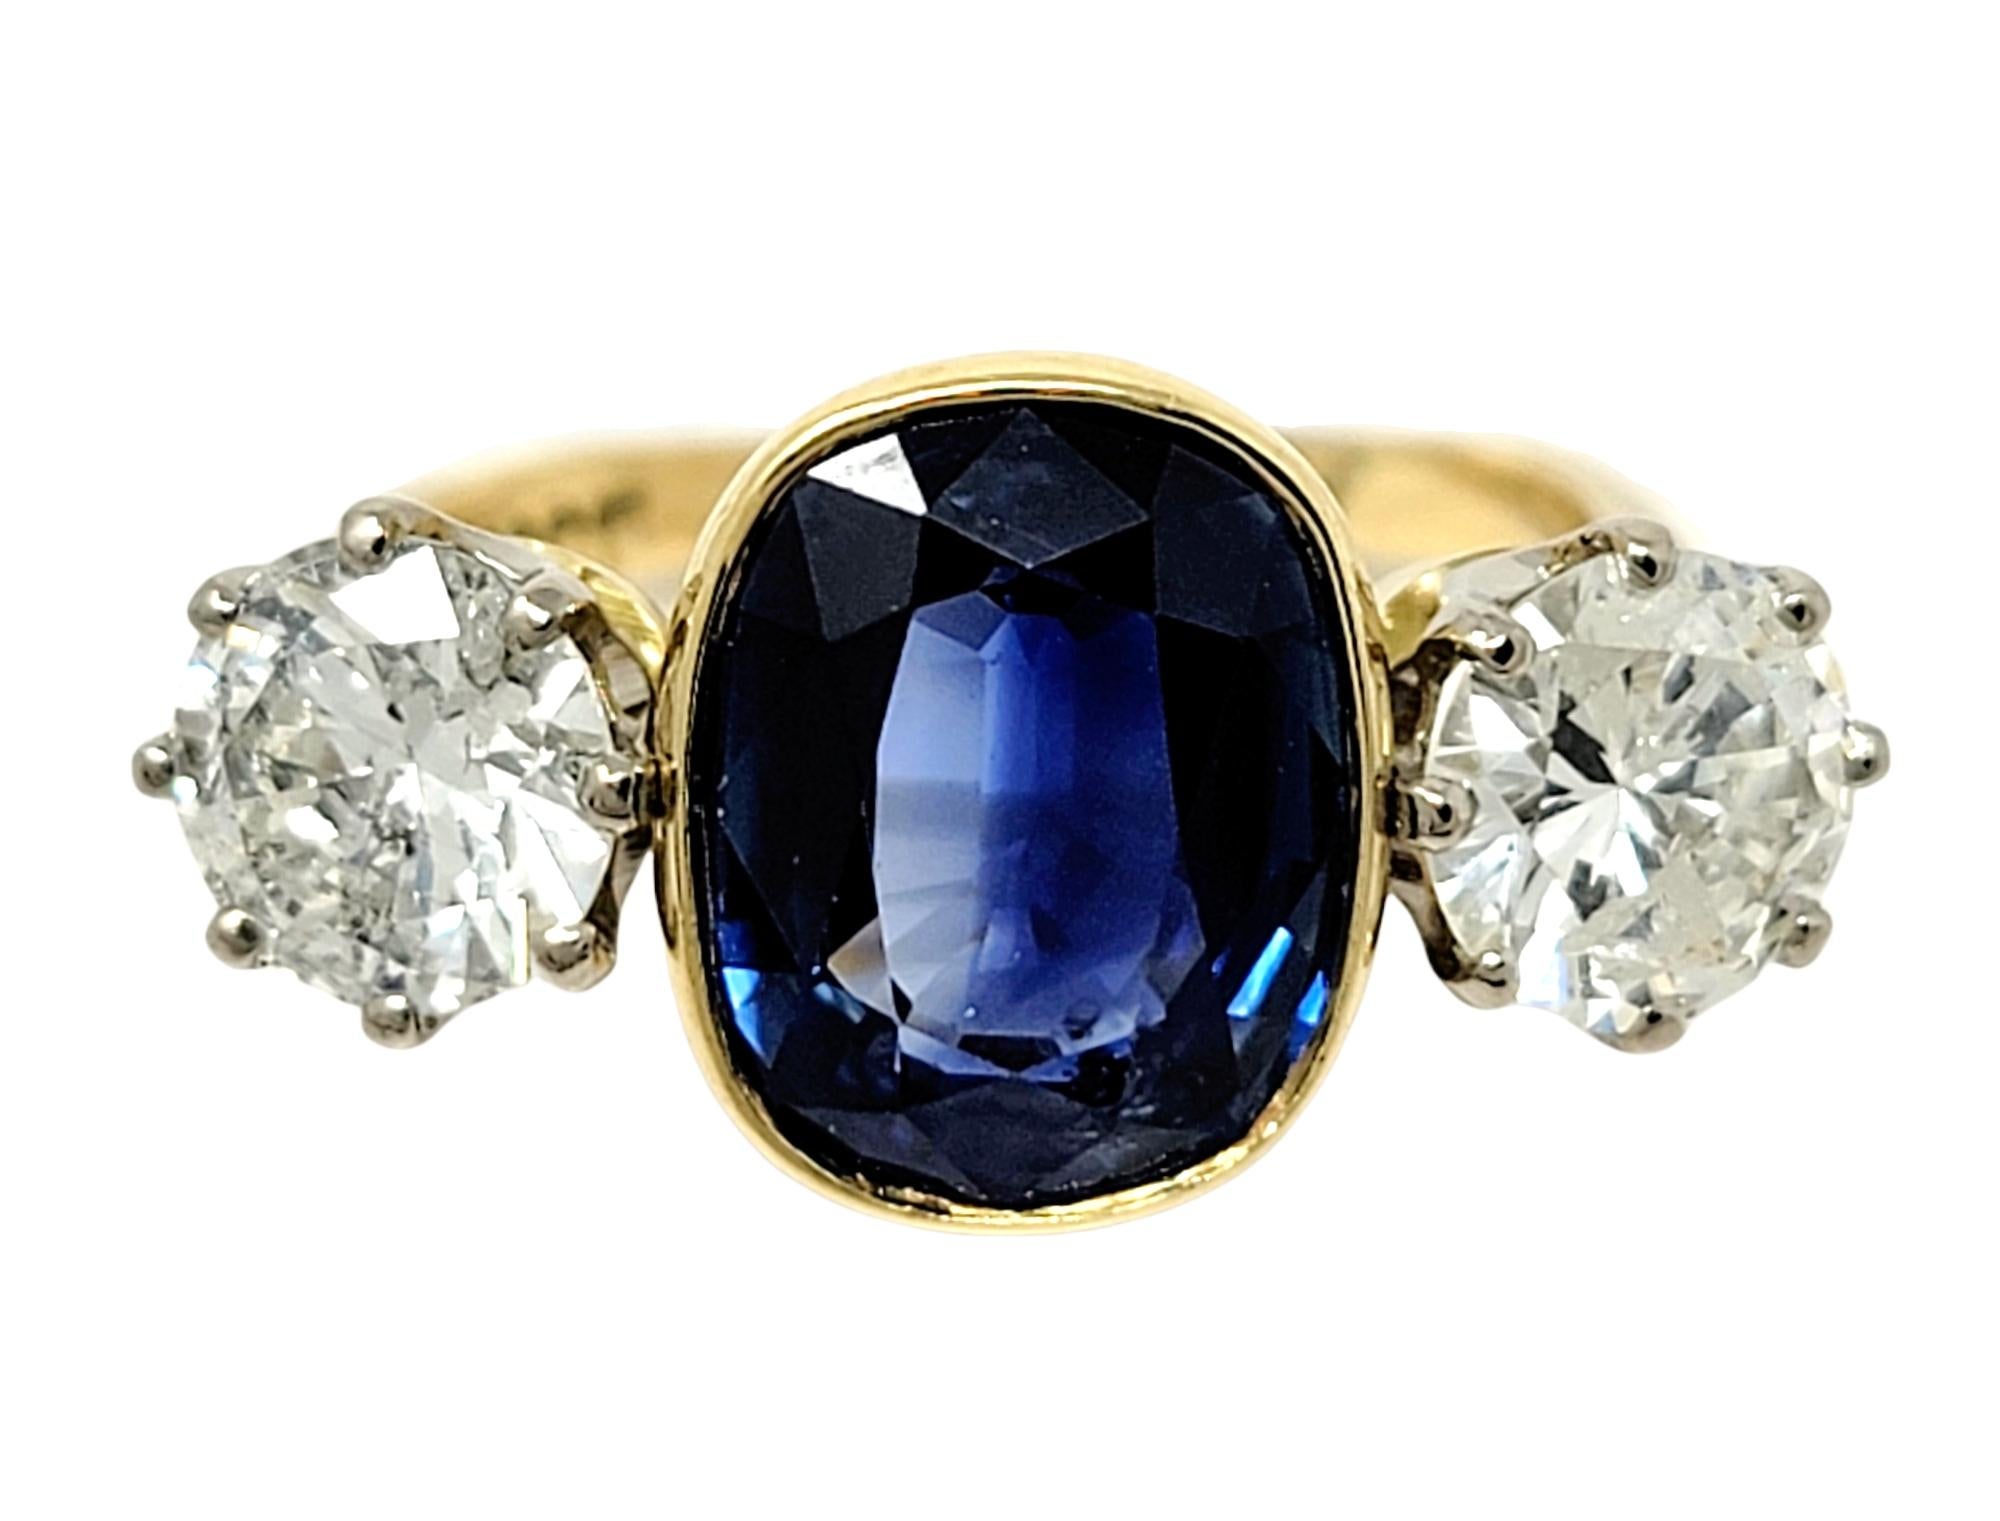 Ring size: 5.75

Simply stunning three stone sapphire and diamond ring. A modernized take on the classic three stone ring, this incredible piece fills the finger with sparkle. A cushion cut bezel set brilliant blue sapphire stone sits at the center,